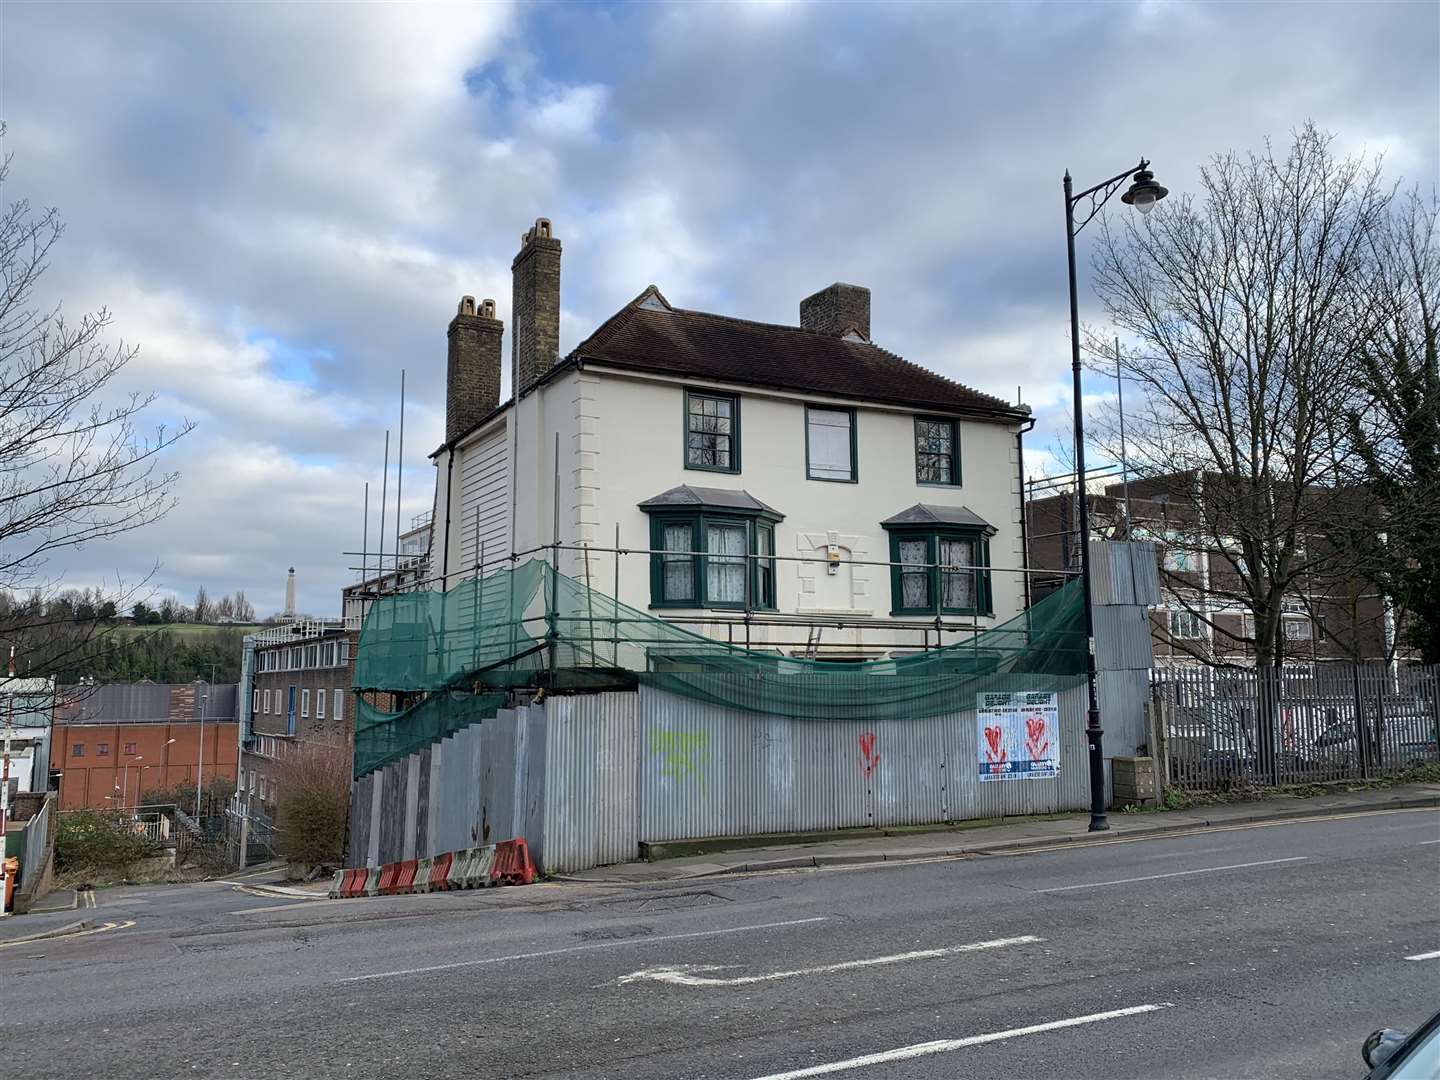 The boarded-up Lord Duncan pub in February last year